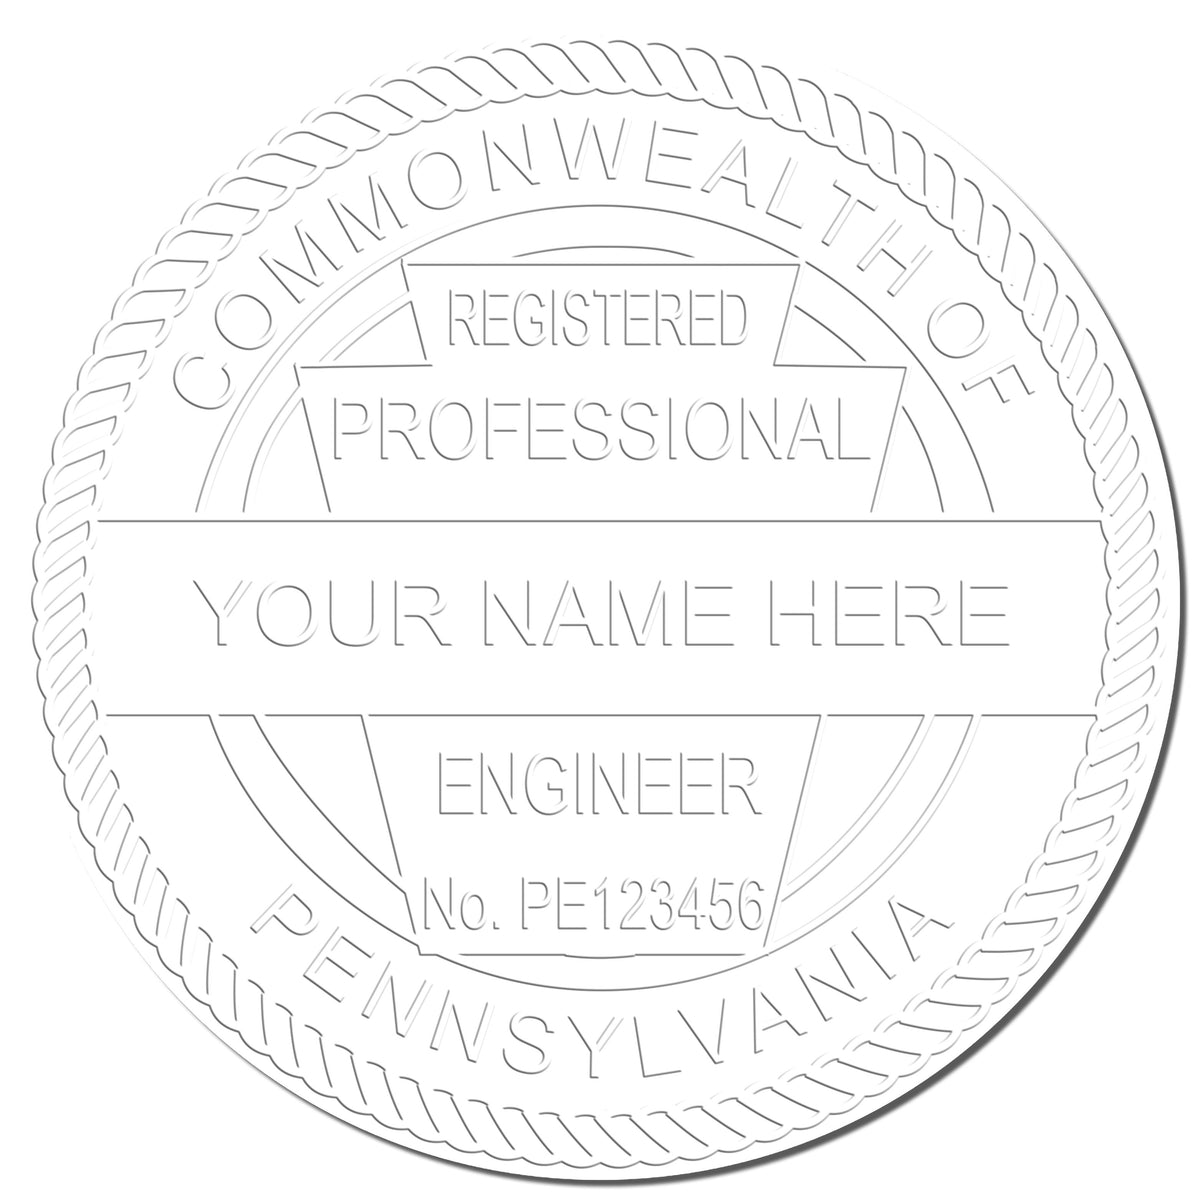 This paper is stamped with a sample imprint of the Gift Pennsylvania Engineer Seal, signifying its quality and reliability.